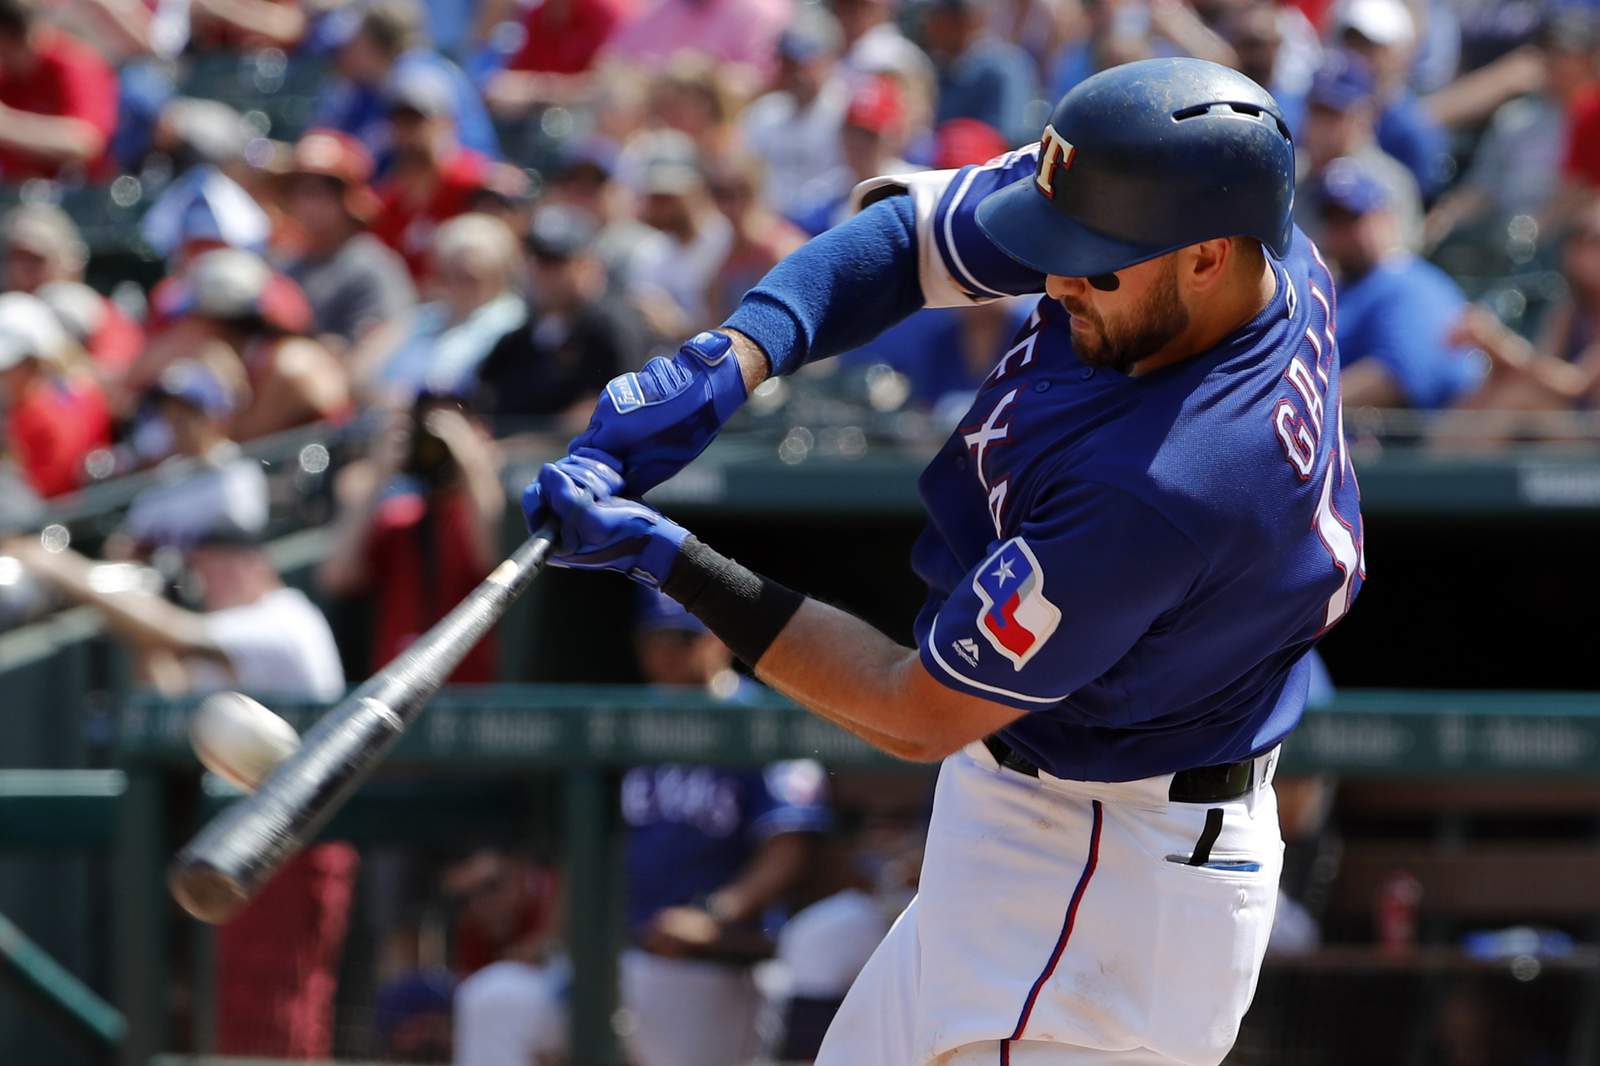 Gallo homers and Rangers use 6 pitchers to beat Angels 2-0